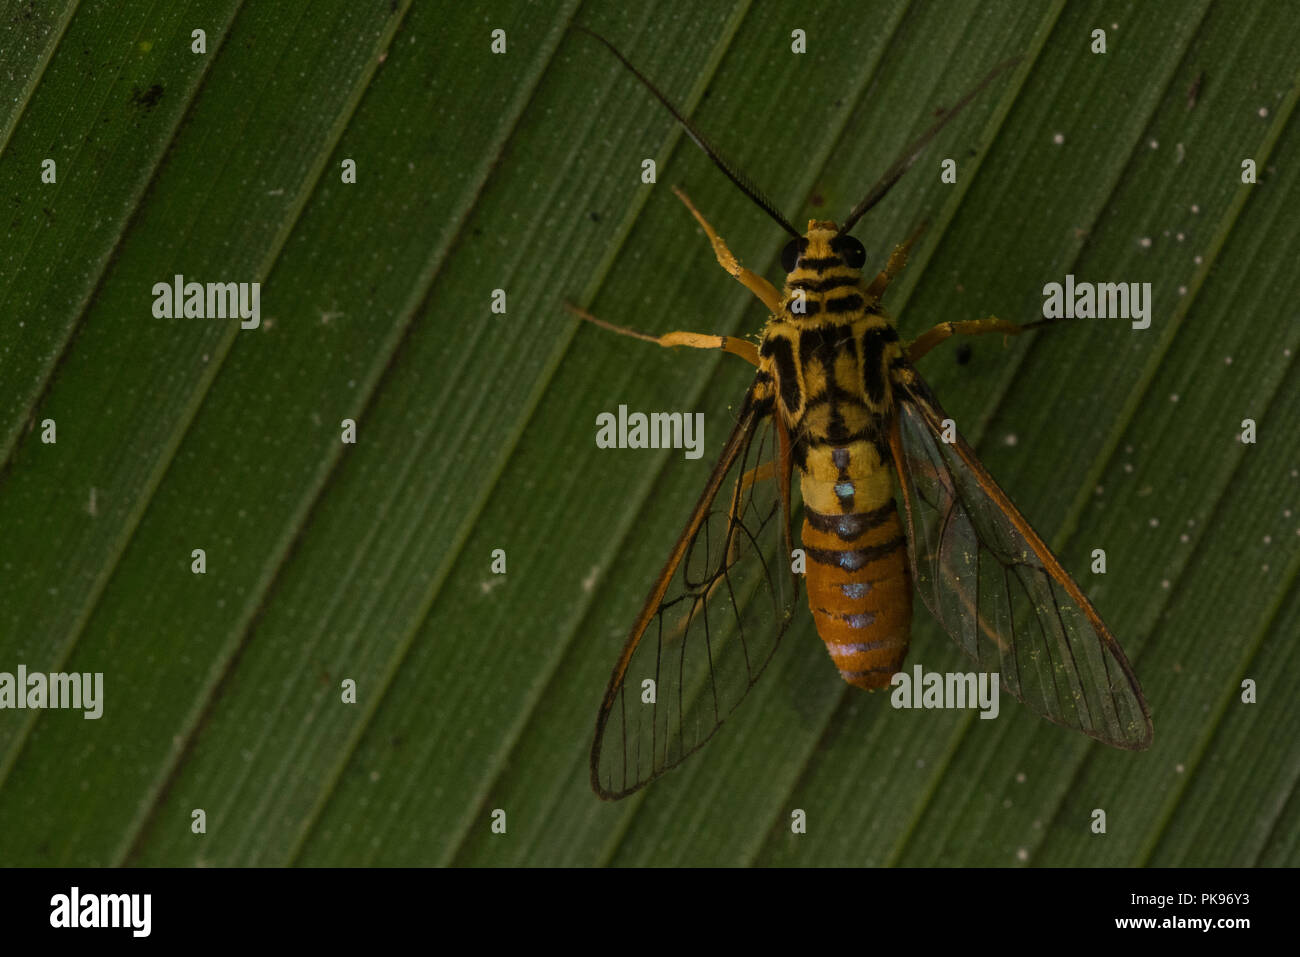 A harmless clearwing moth, mimics a stinging wasp in order to deter potential predators. Stock Photo